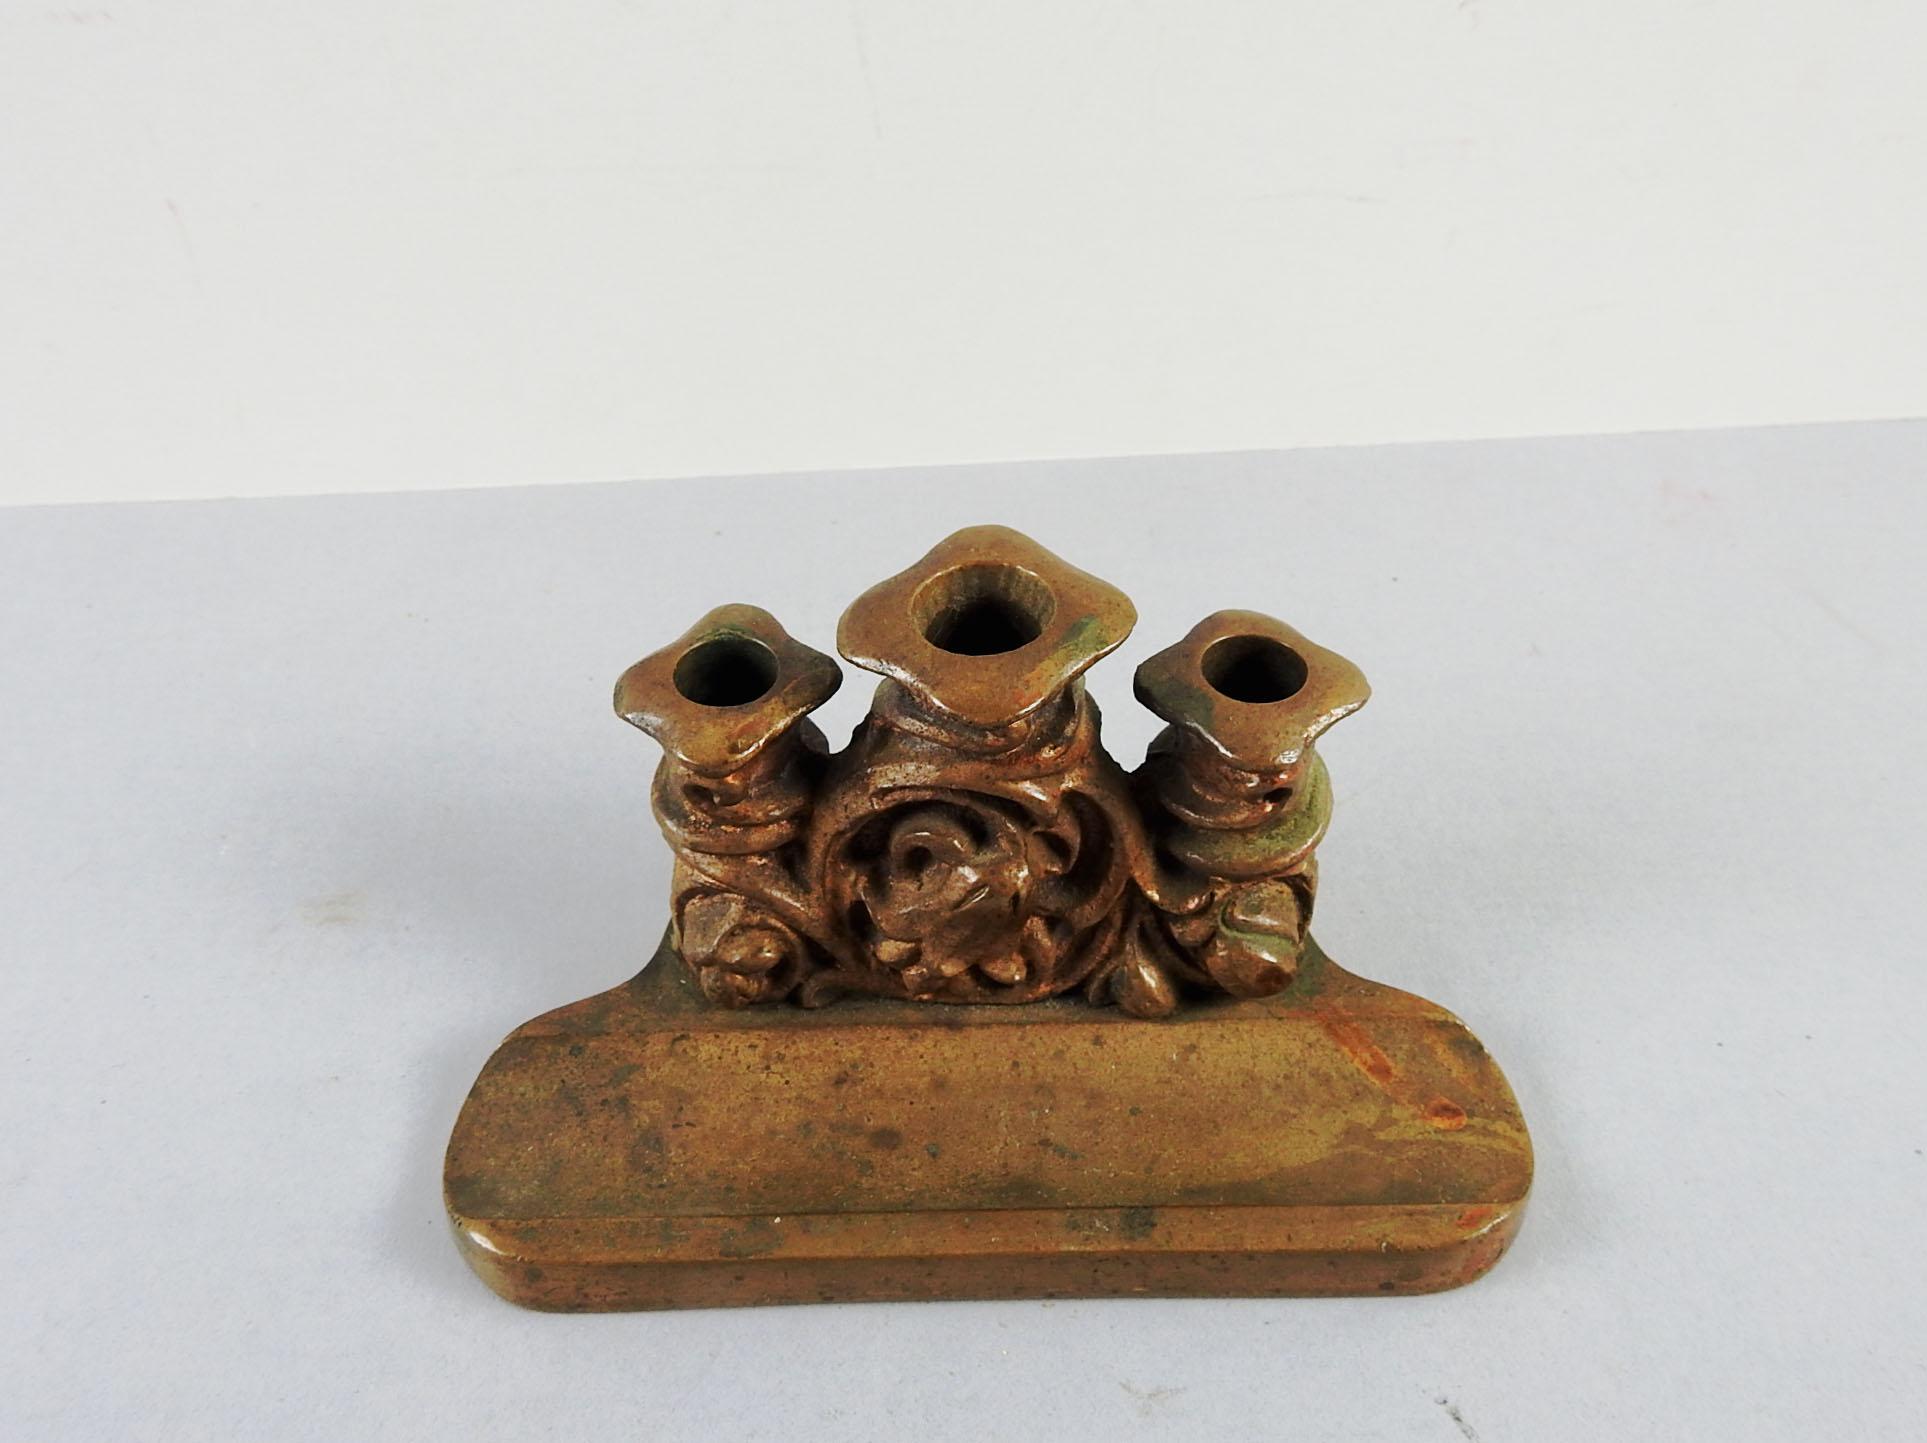 Antique gilt bronze pen holder with candle holders.  Ornate detailed art nouveau floral details, manufactured by The Netting Co. Detroit.  Overall patina, hole size .5